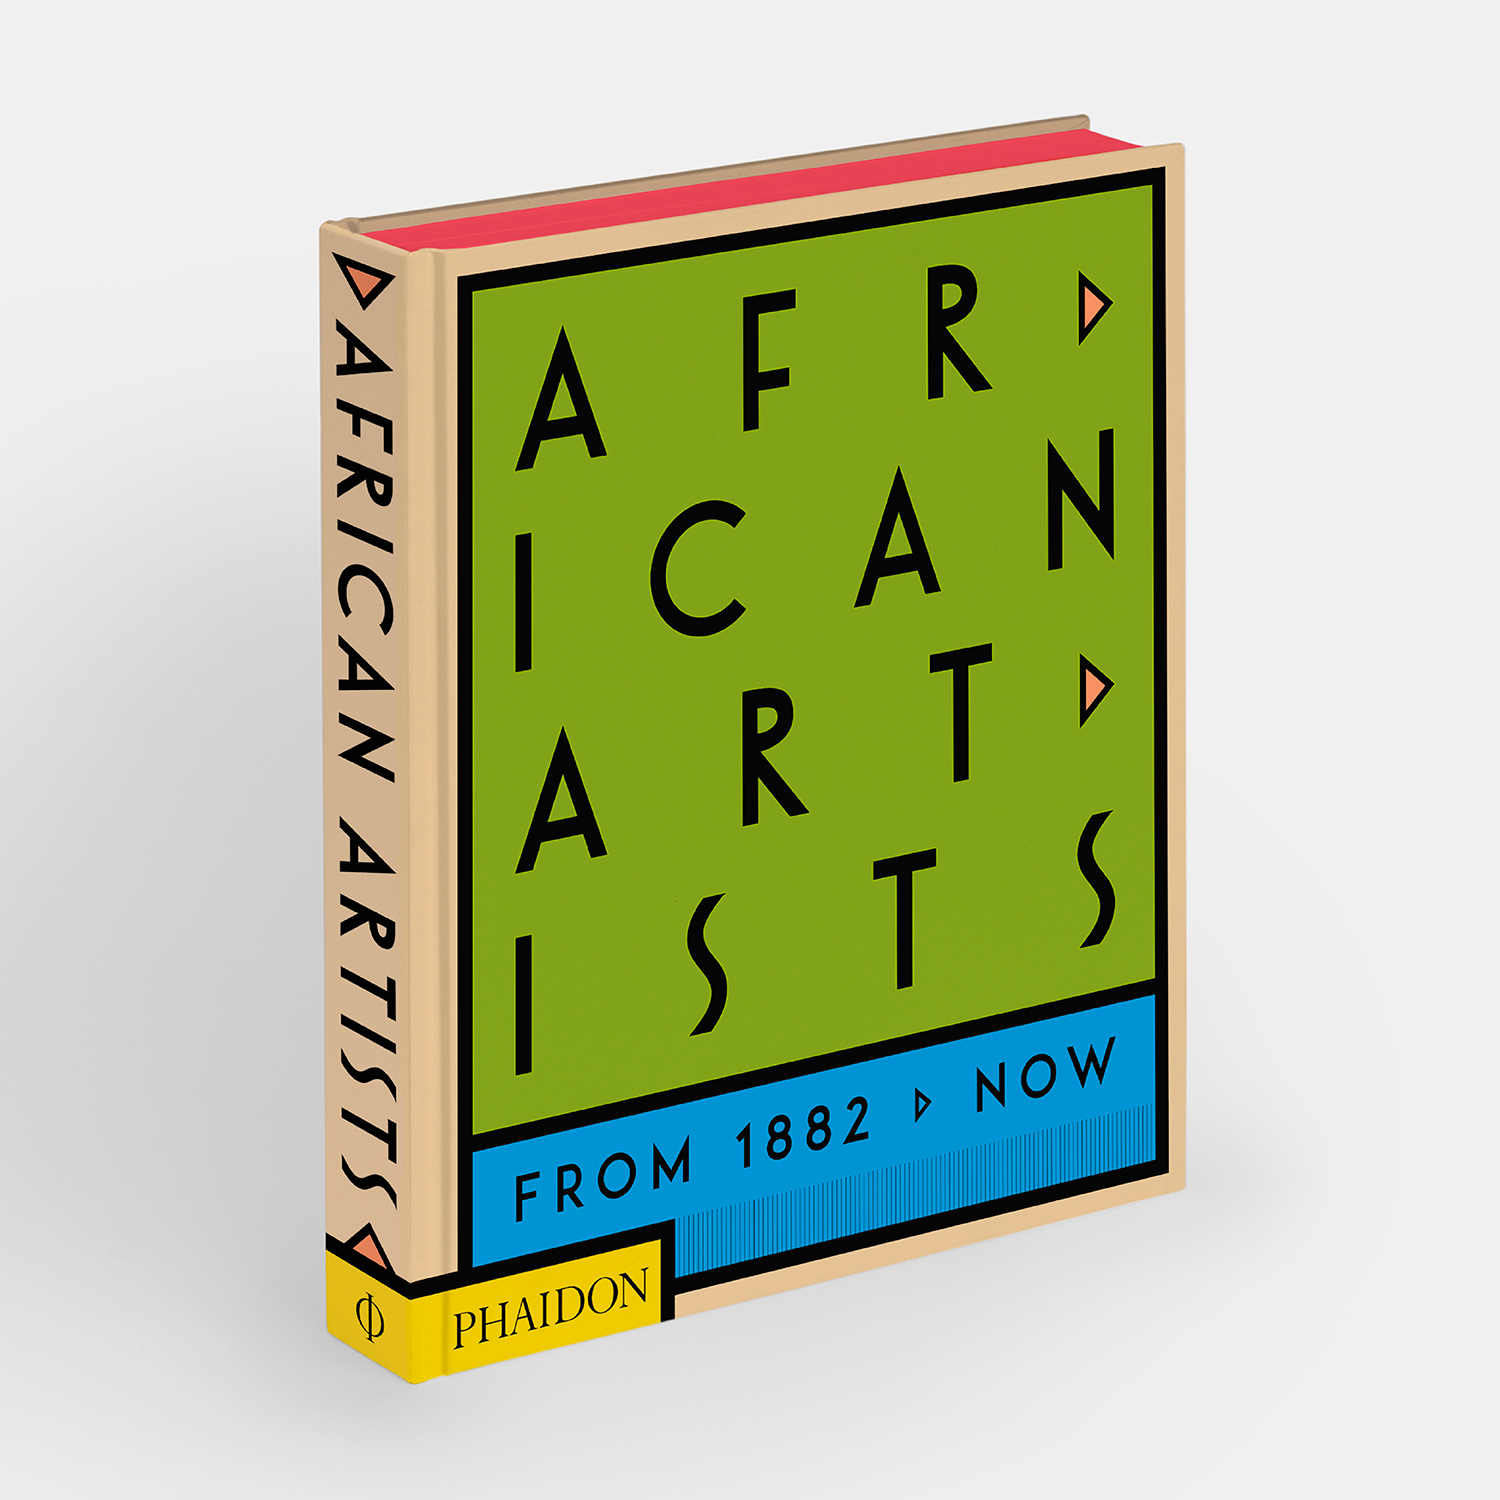 African Artists from 1882 to Now